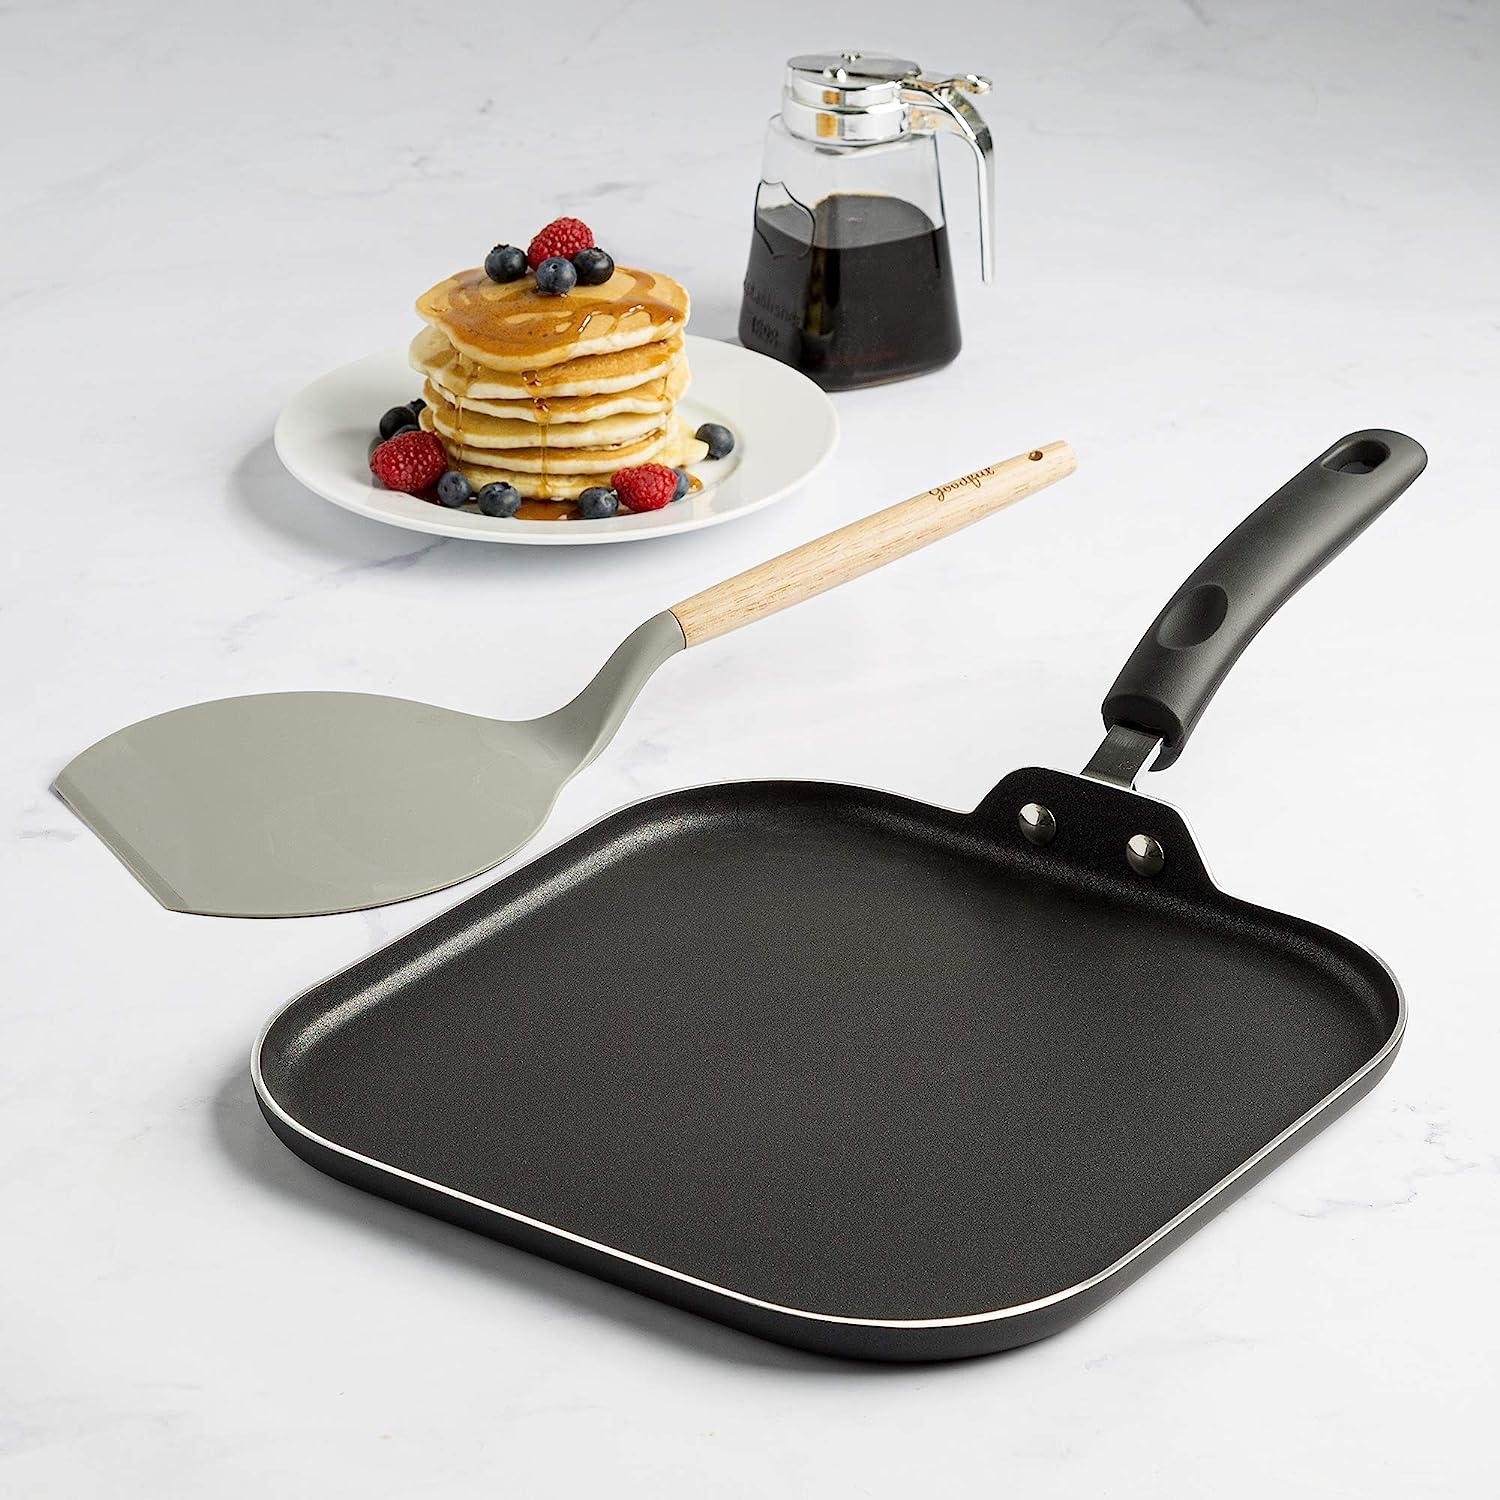 flat nonstick griddle pan with a handle and a wide turner with a wood handle